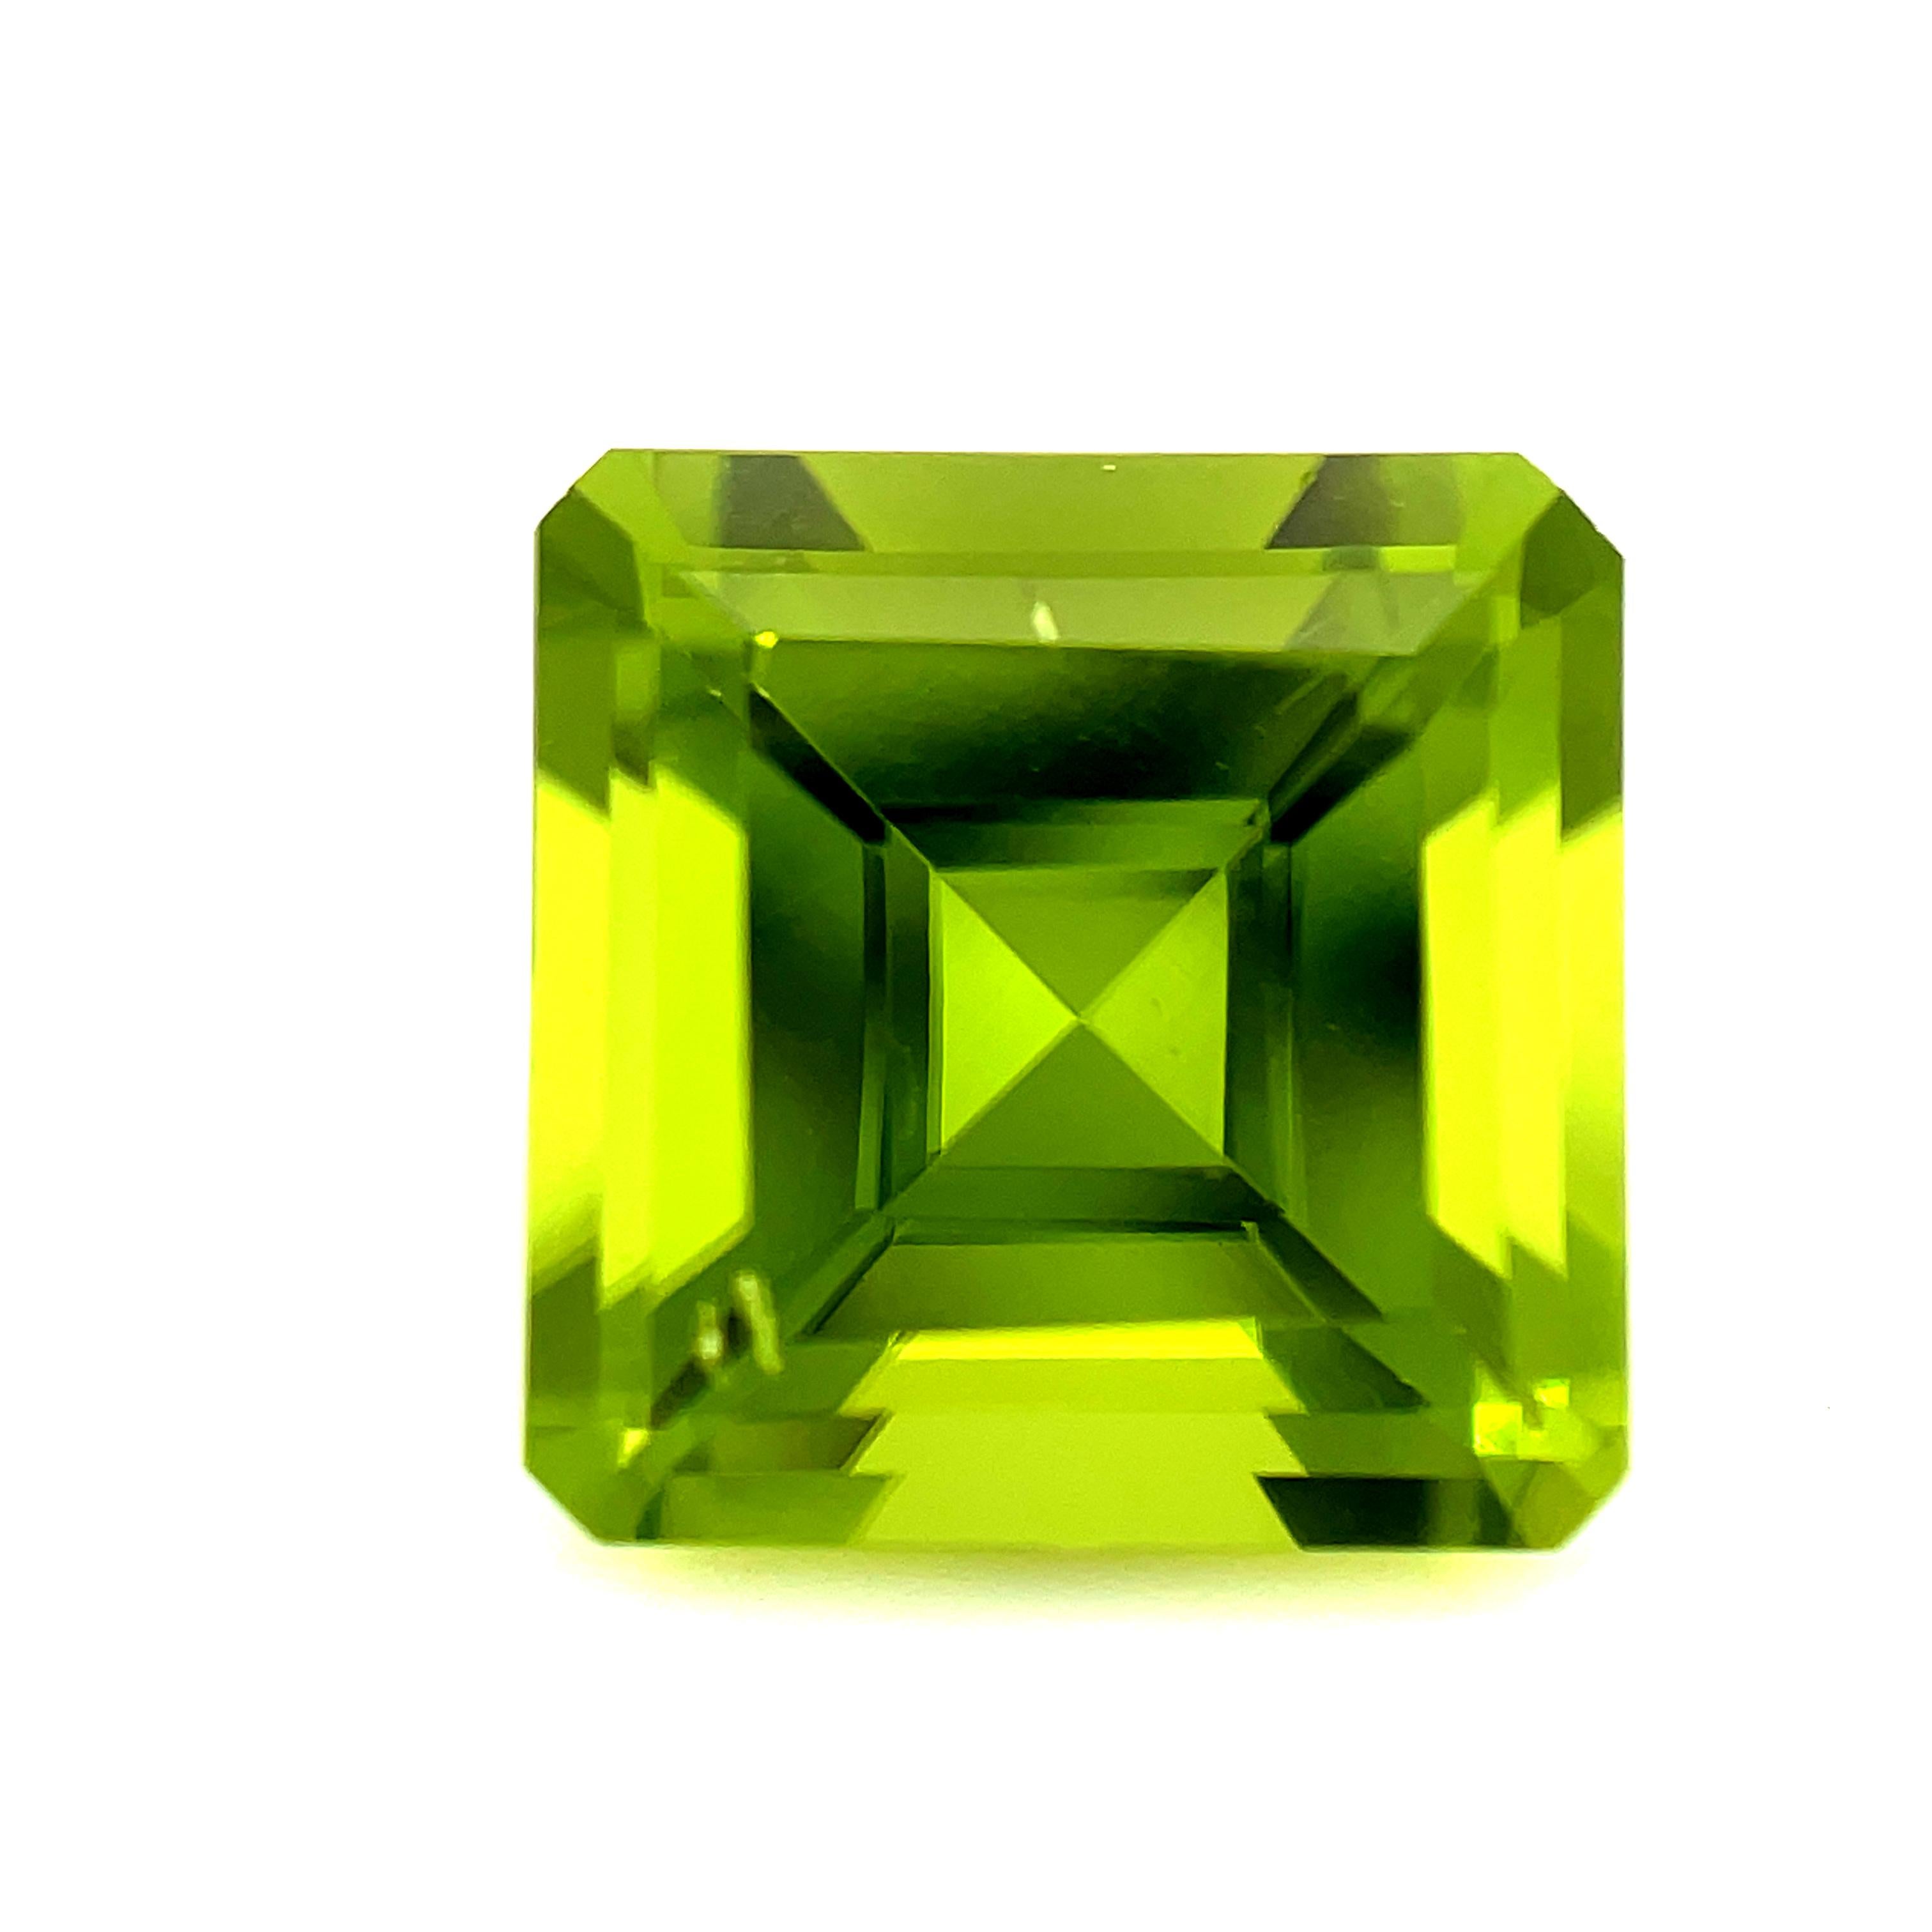 This beautifully crystalline peridot has a bright, apple green color and exceptional clarity! It has excellent luster, giving this gem an extraordinary shine and brilliance. It is a very well proportioned square measuring 10.12 x 10.12 x 6.62